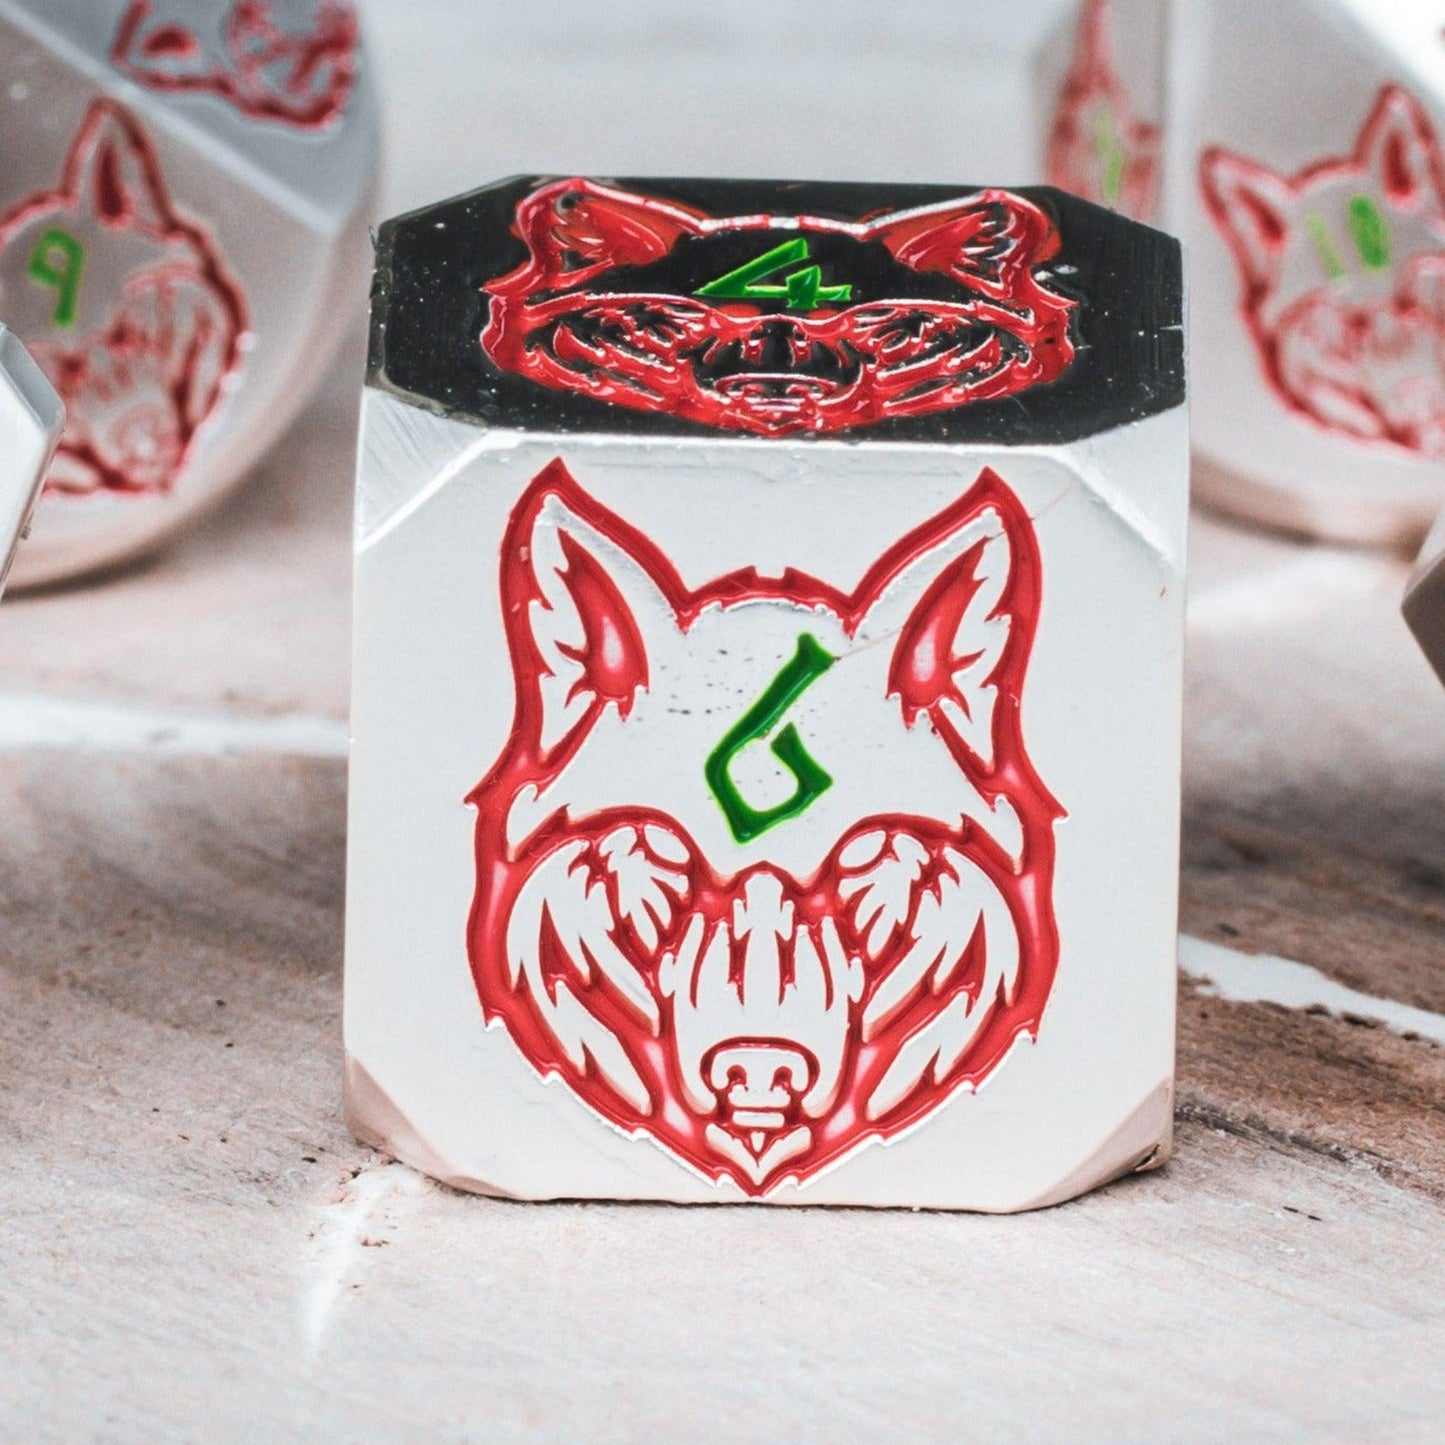 Wolves' Den Red, Green, and Silver Metal Dice Set